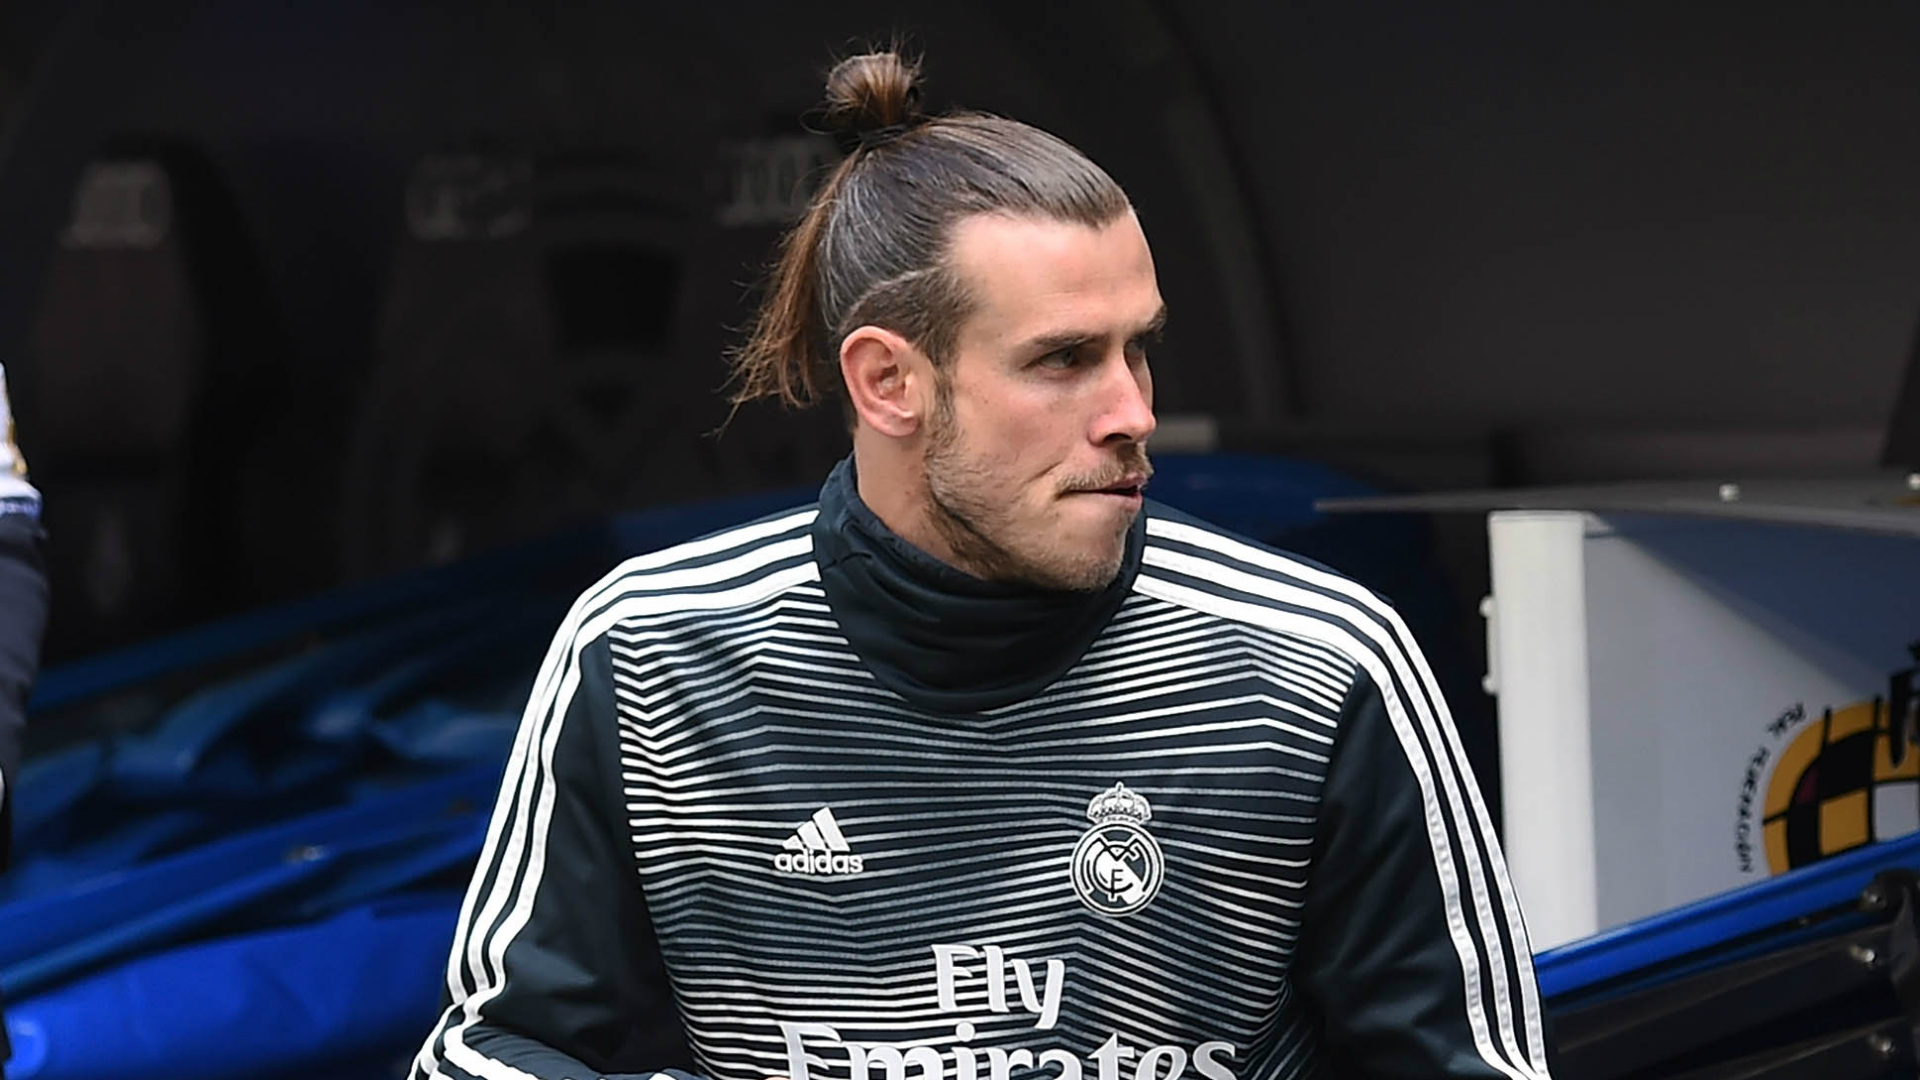 It has been claimed Tottenham are moving to bring Gareth Bale back to the club, but his agent indicated there is nothing to the story.